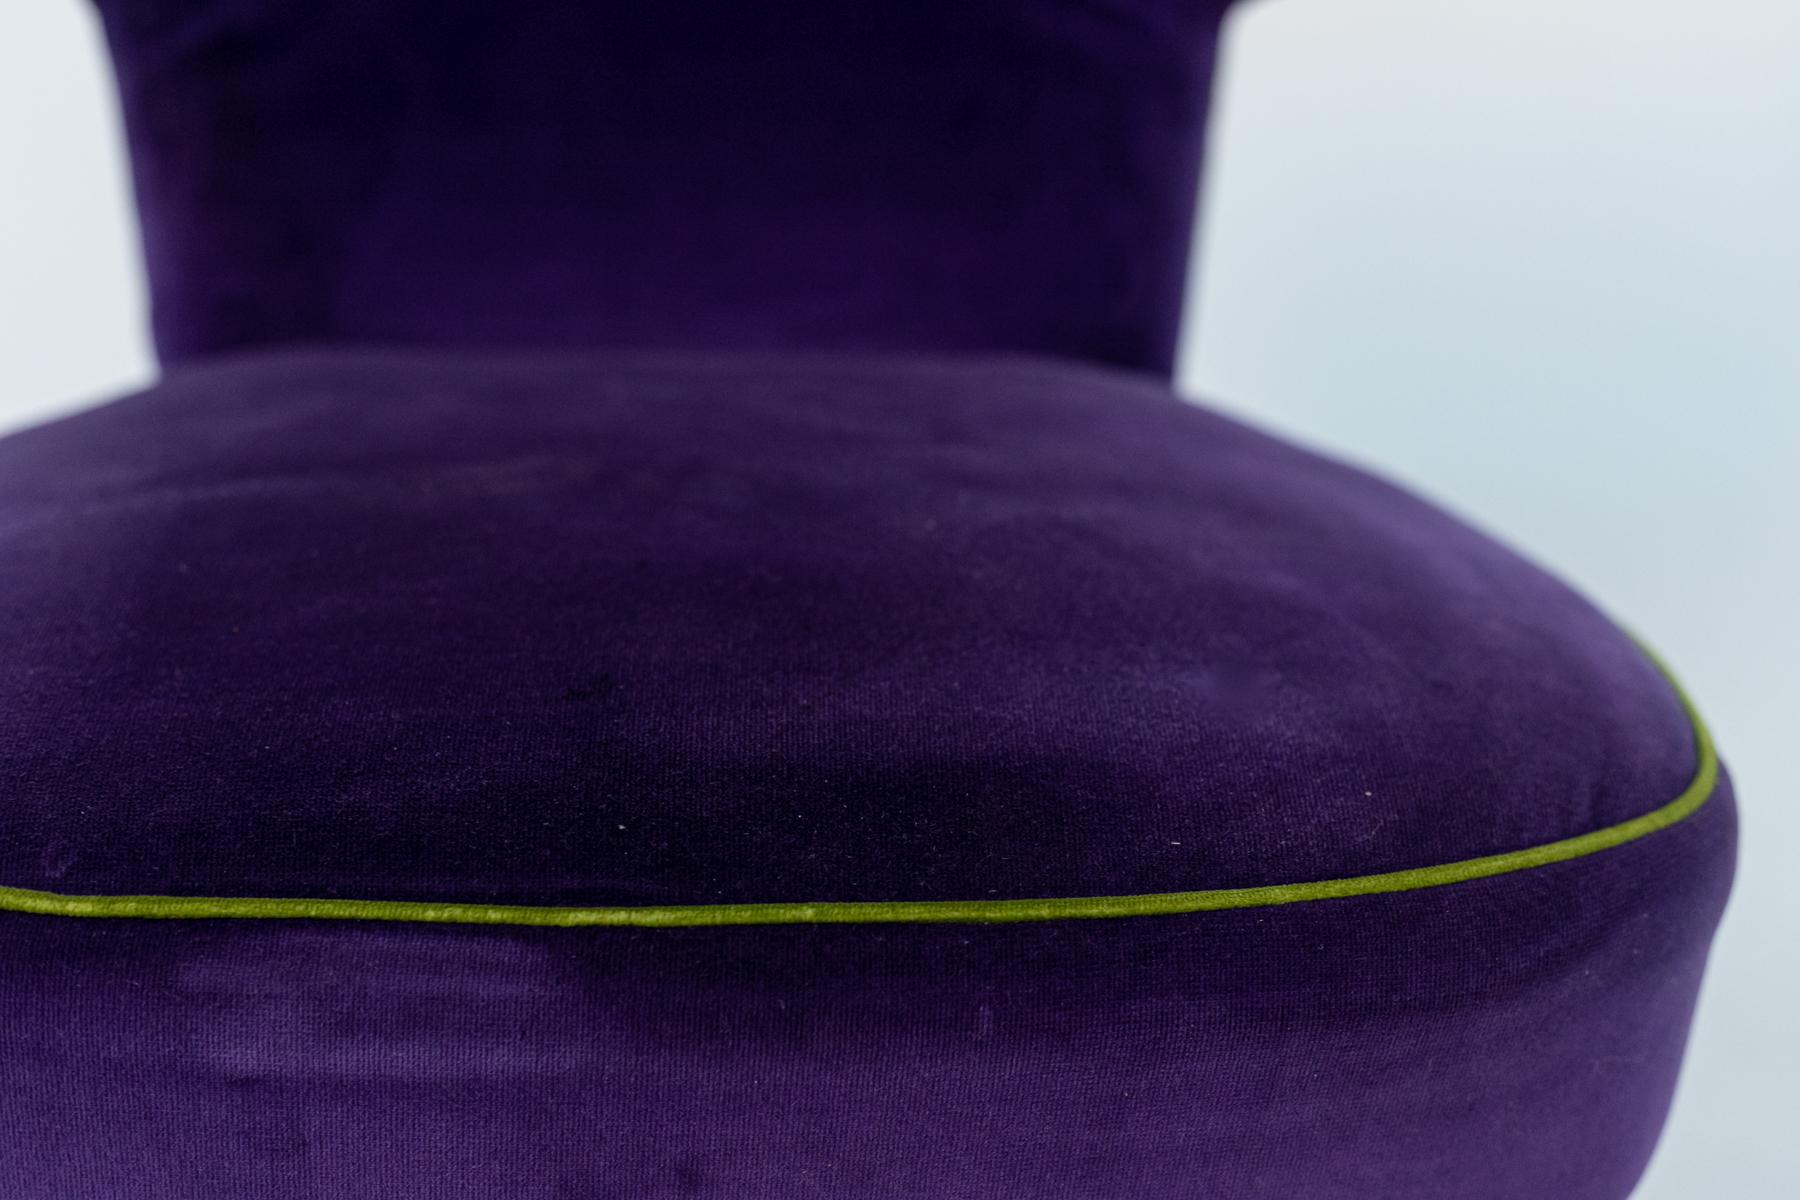 Mid-Century Modern Violet Velvet Armchairs by Gio Ponti and Nino Zoncada for Cassina